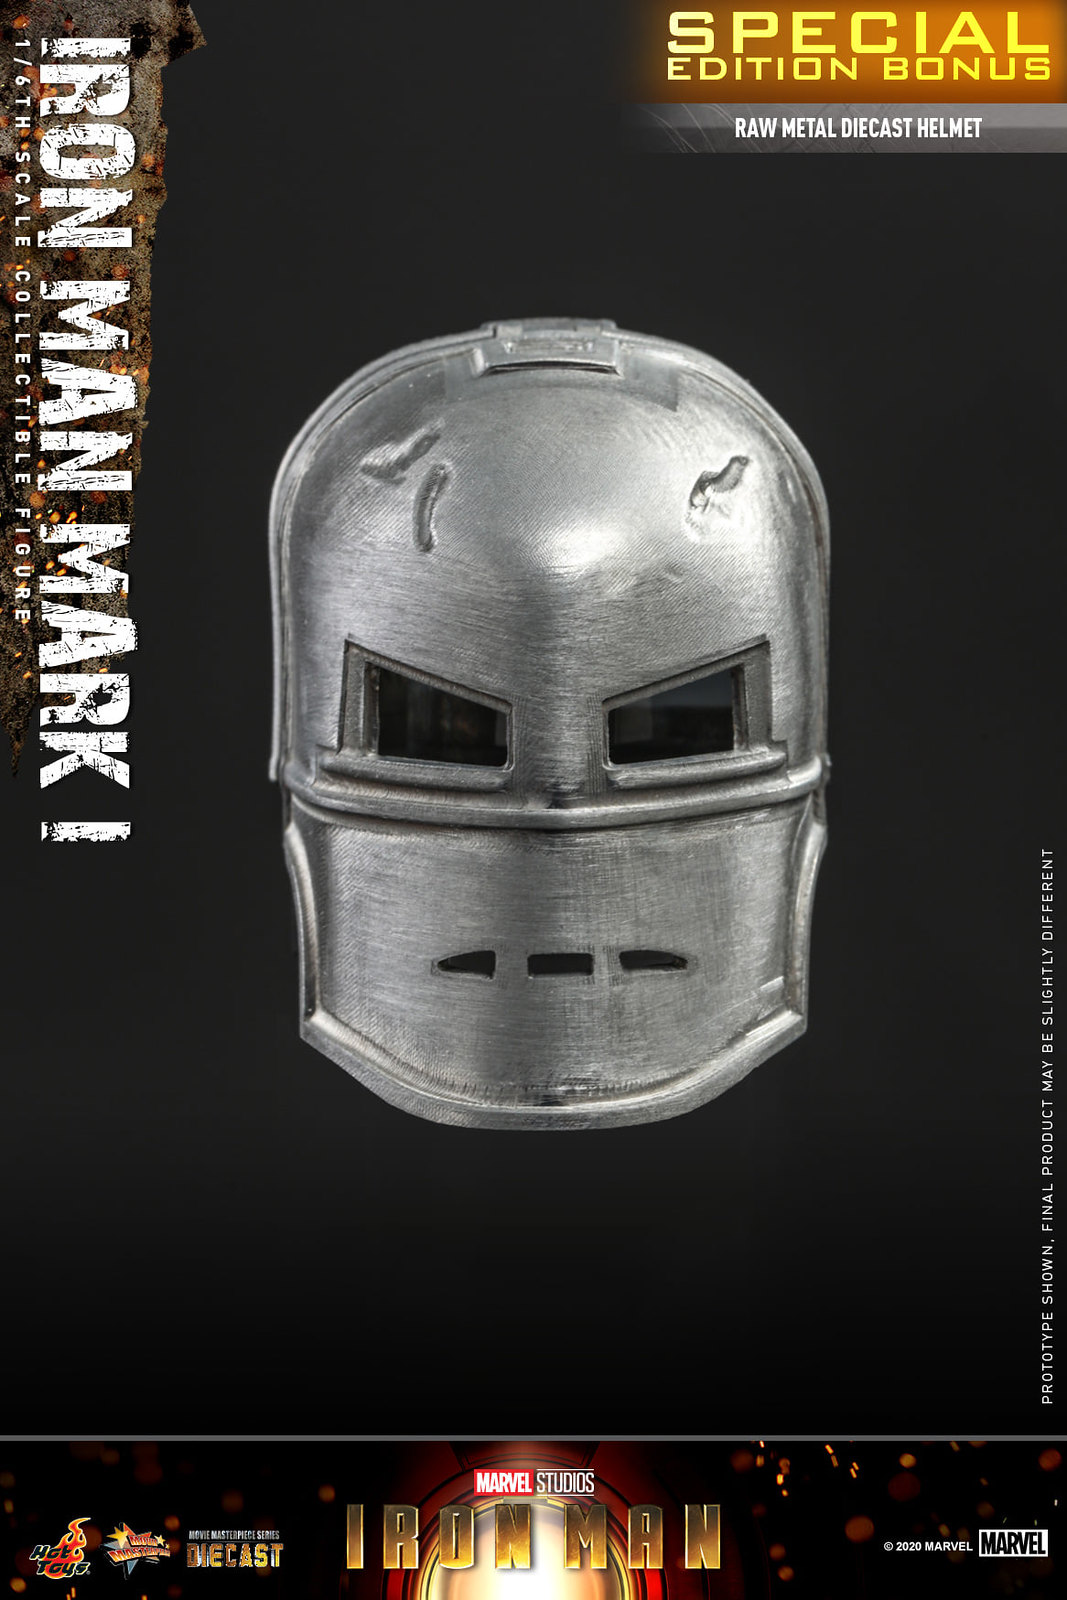 NEW PRODUCT: Hot Toys Iron Man - 1/6th scale Iron Man Mark I Collectible Figure 51311456873_c16f72f0a9_h